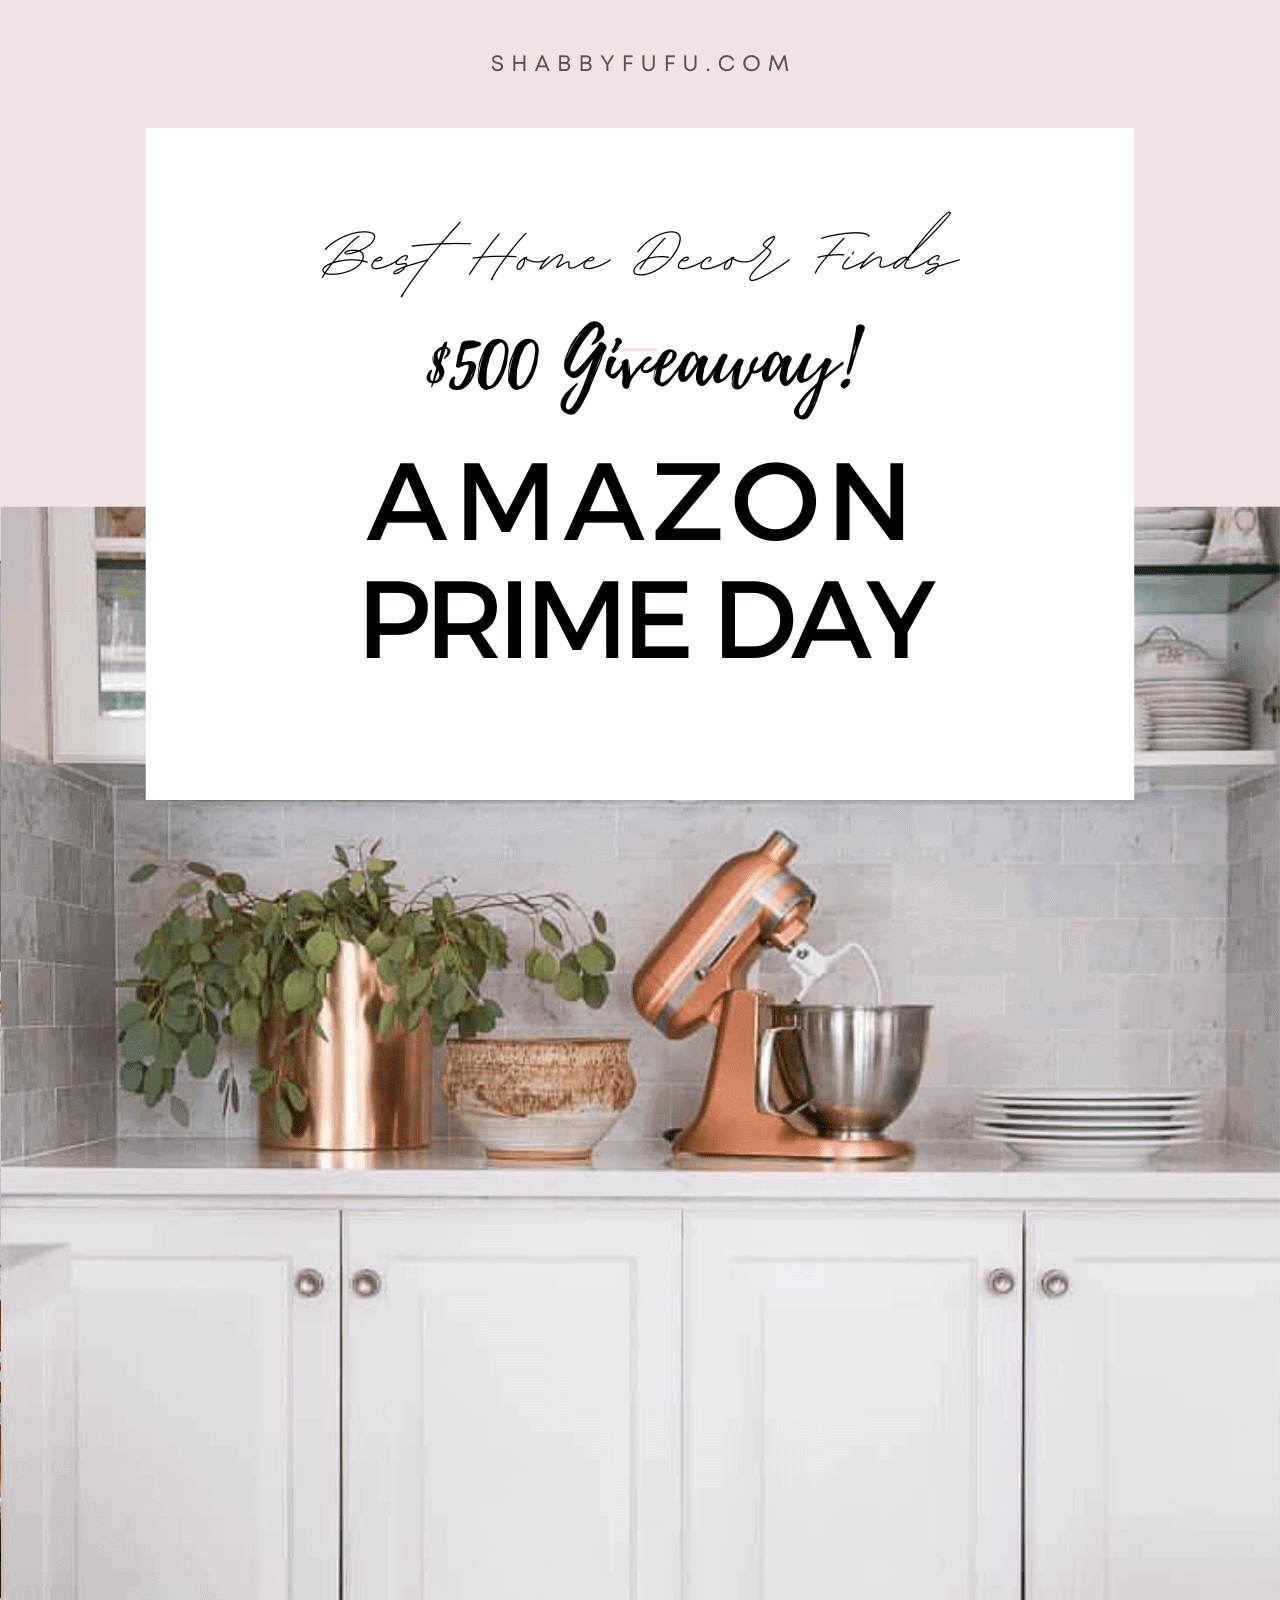 Amazon Prime Day ($500 Gift Card Giveaway!)